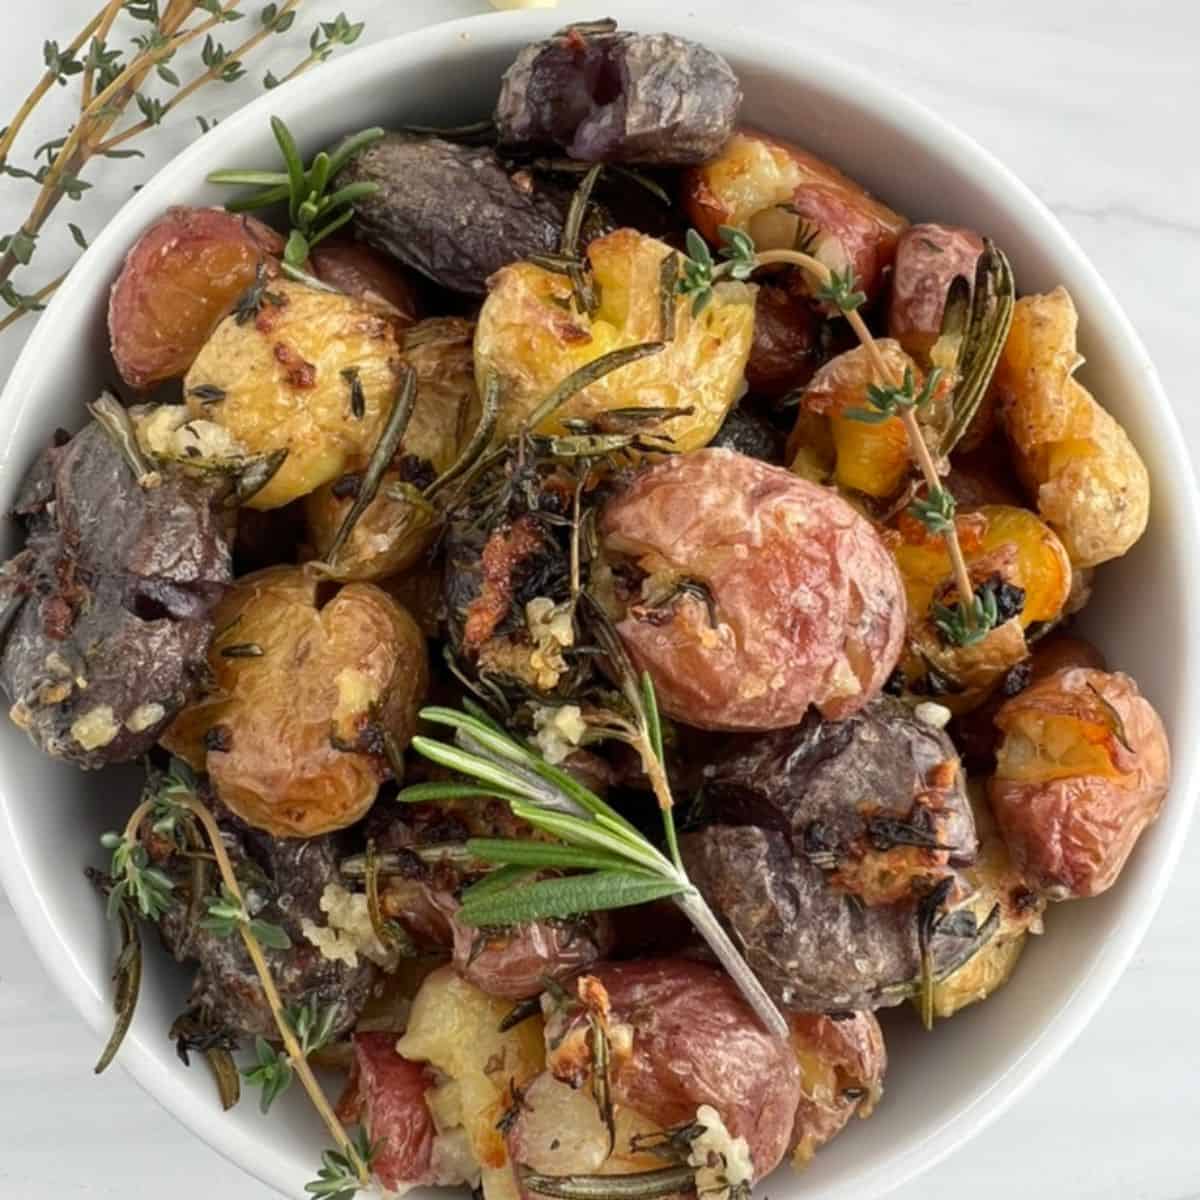 Roasted smashed potatoes with garlic, thyme, and rosemary in a white bowl.